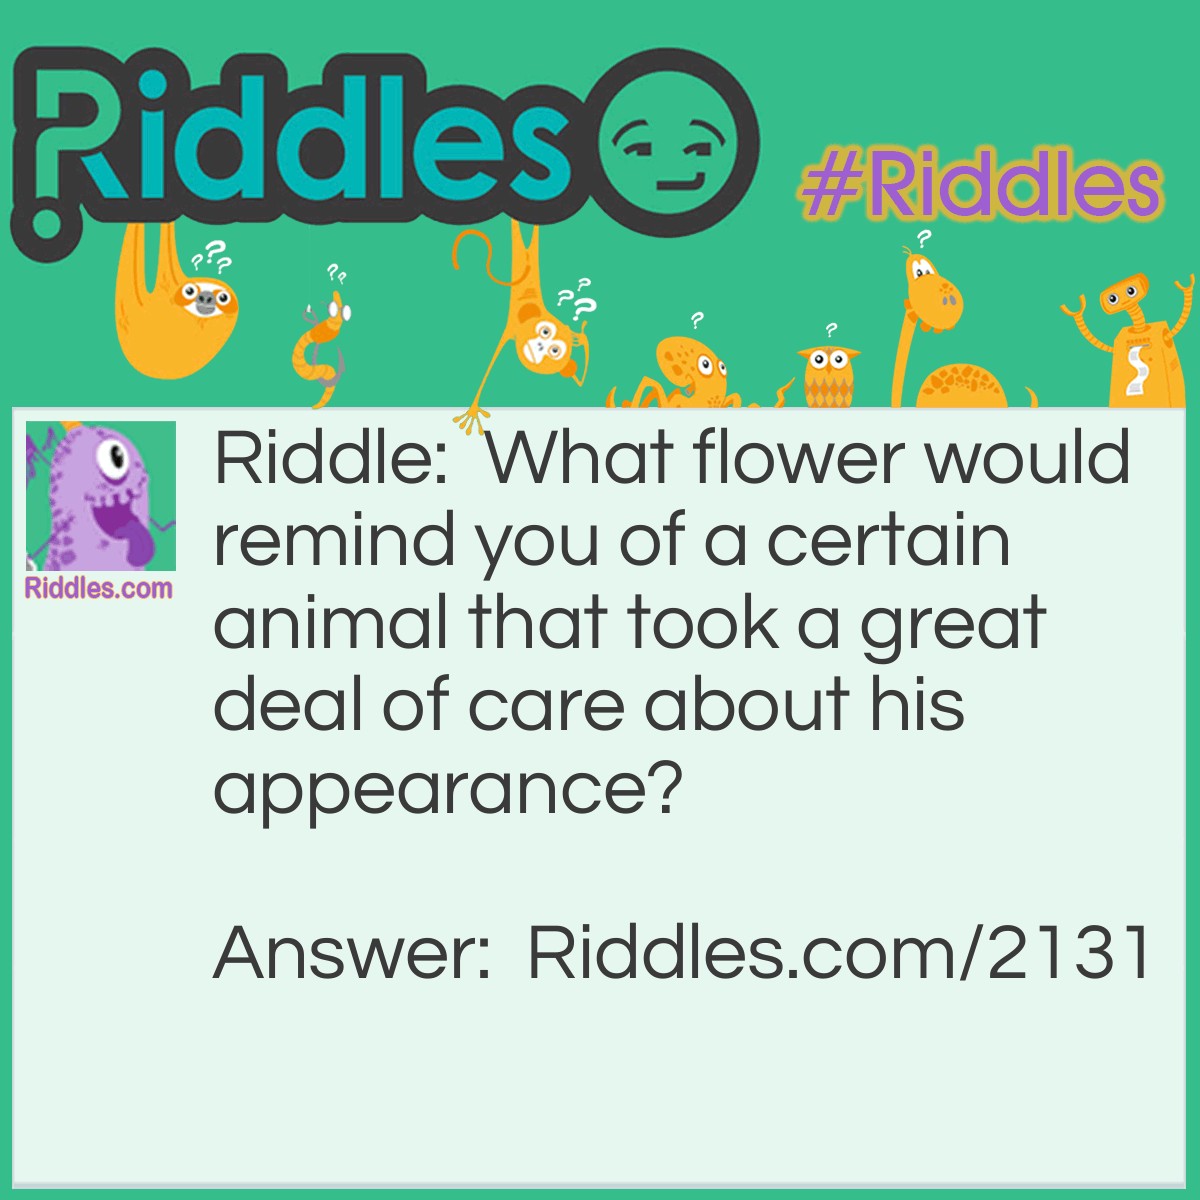 Riddle: What flower would remind you of a certain animal that took a great deal of care about his appearance? Answer: A dandelion (dandy lion).